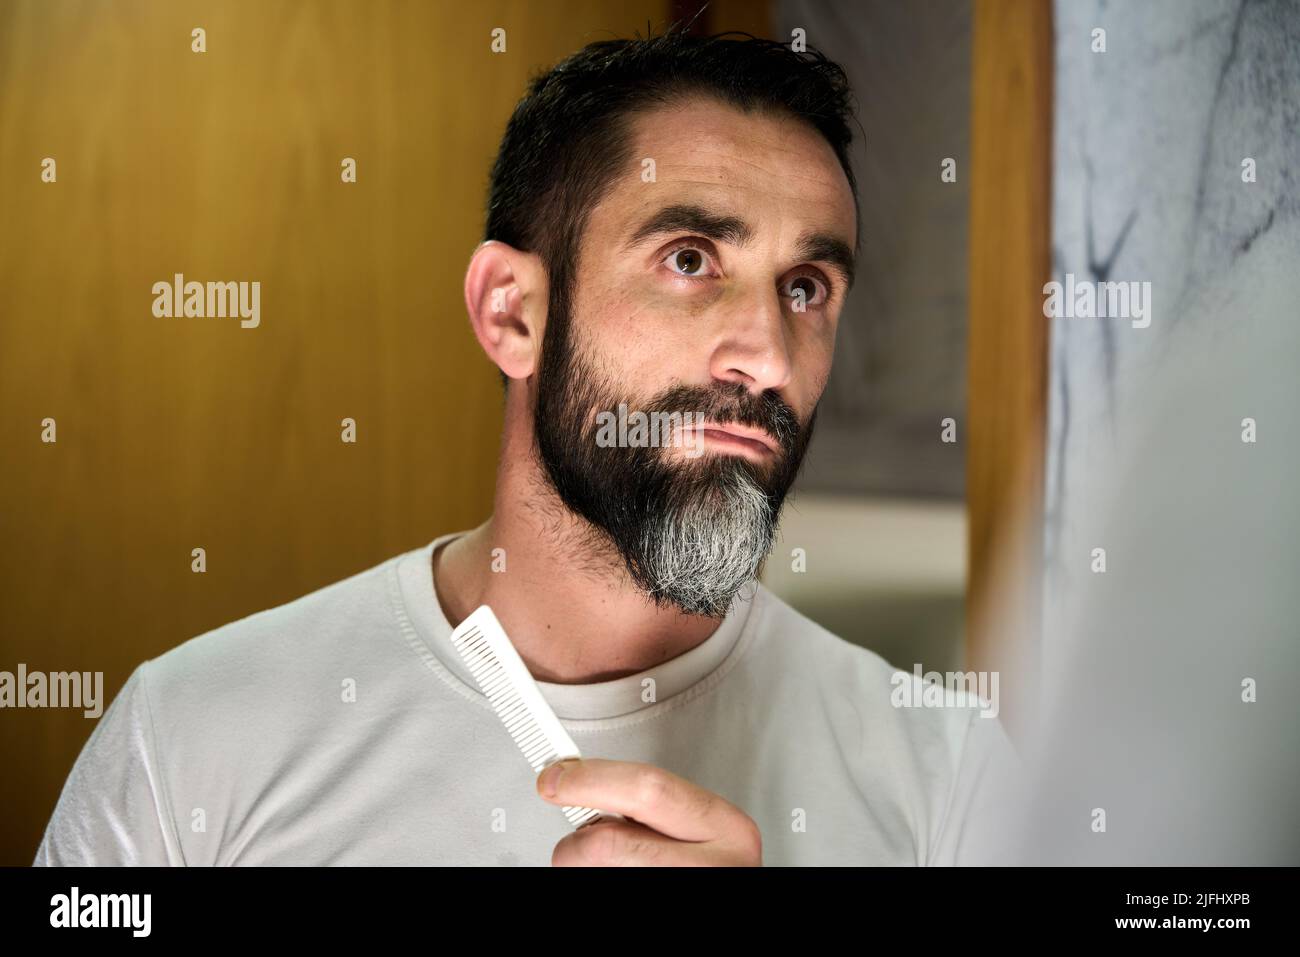 Young man grooming and combing his beard with comb in front of mirror. High quality photo Stock Photo